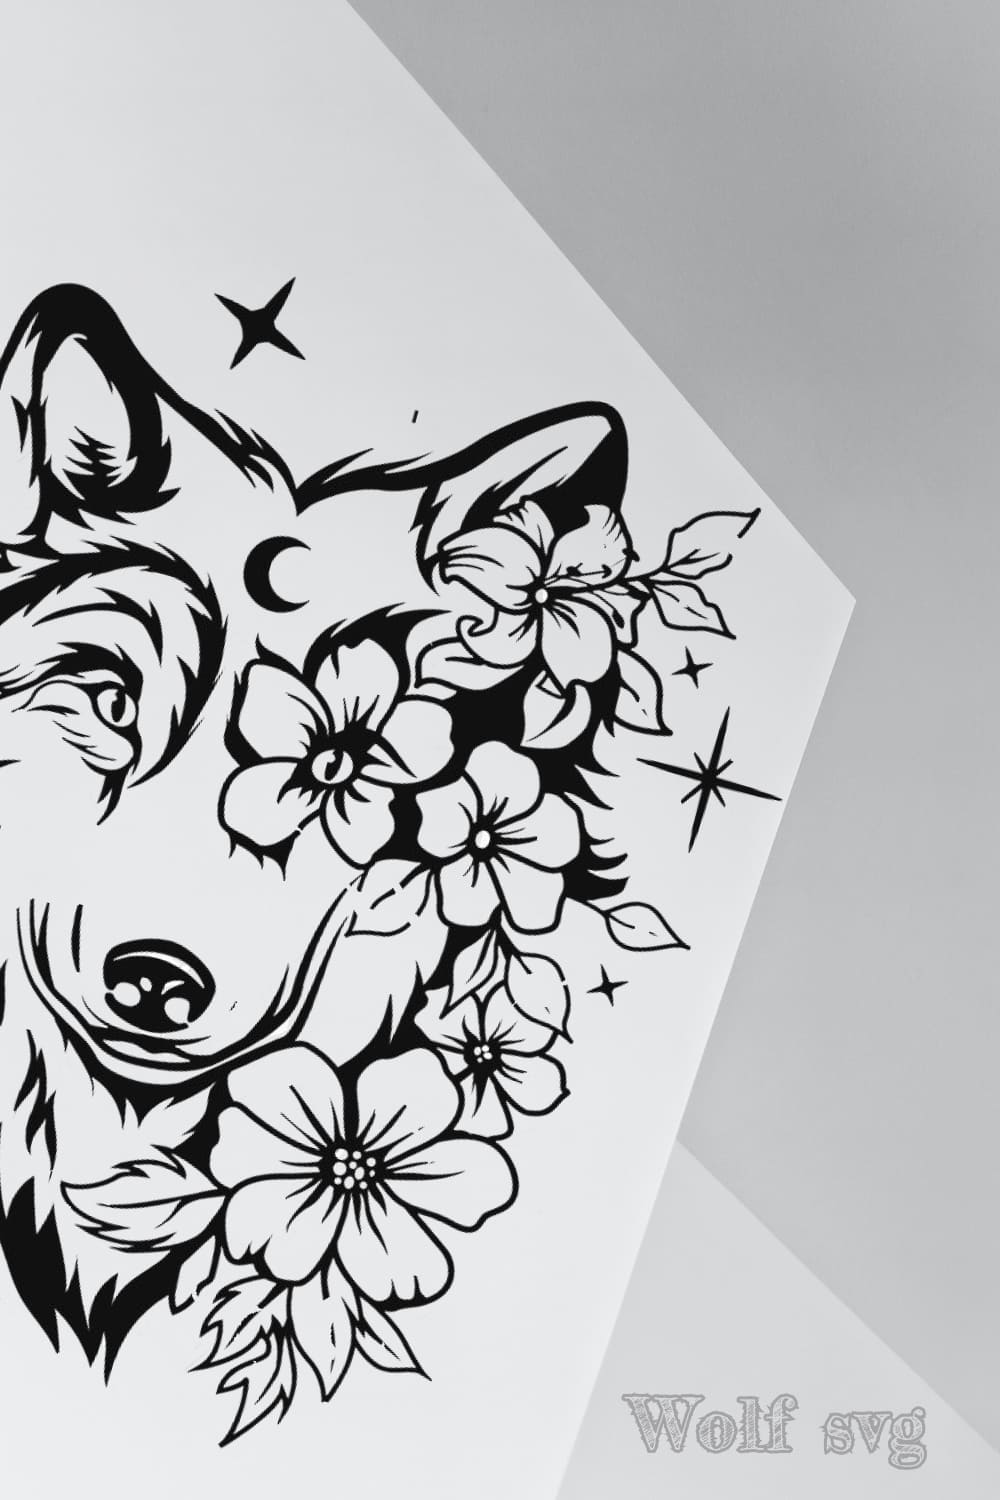 Drawing of a wolf with flowers on it.